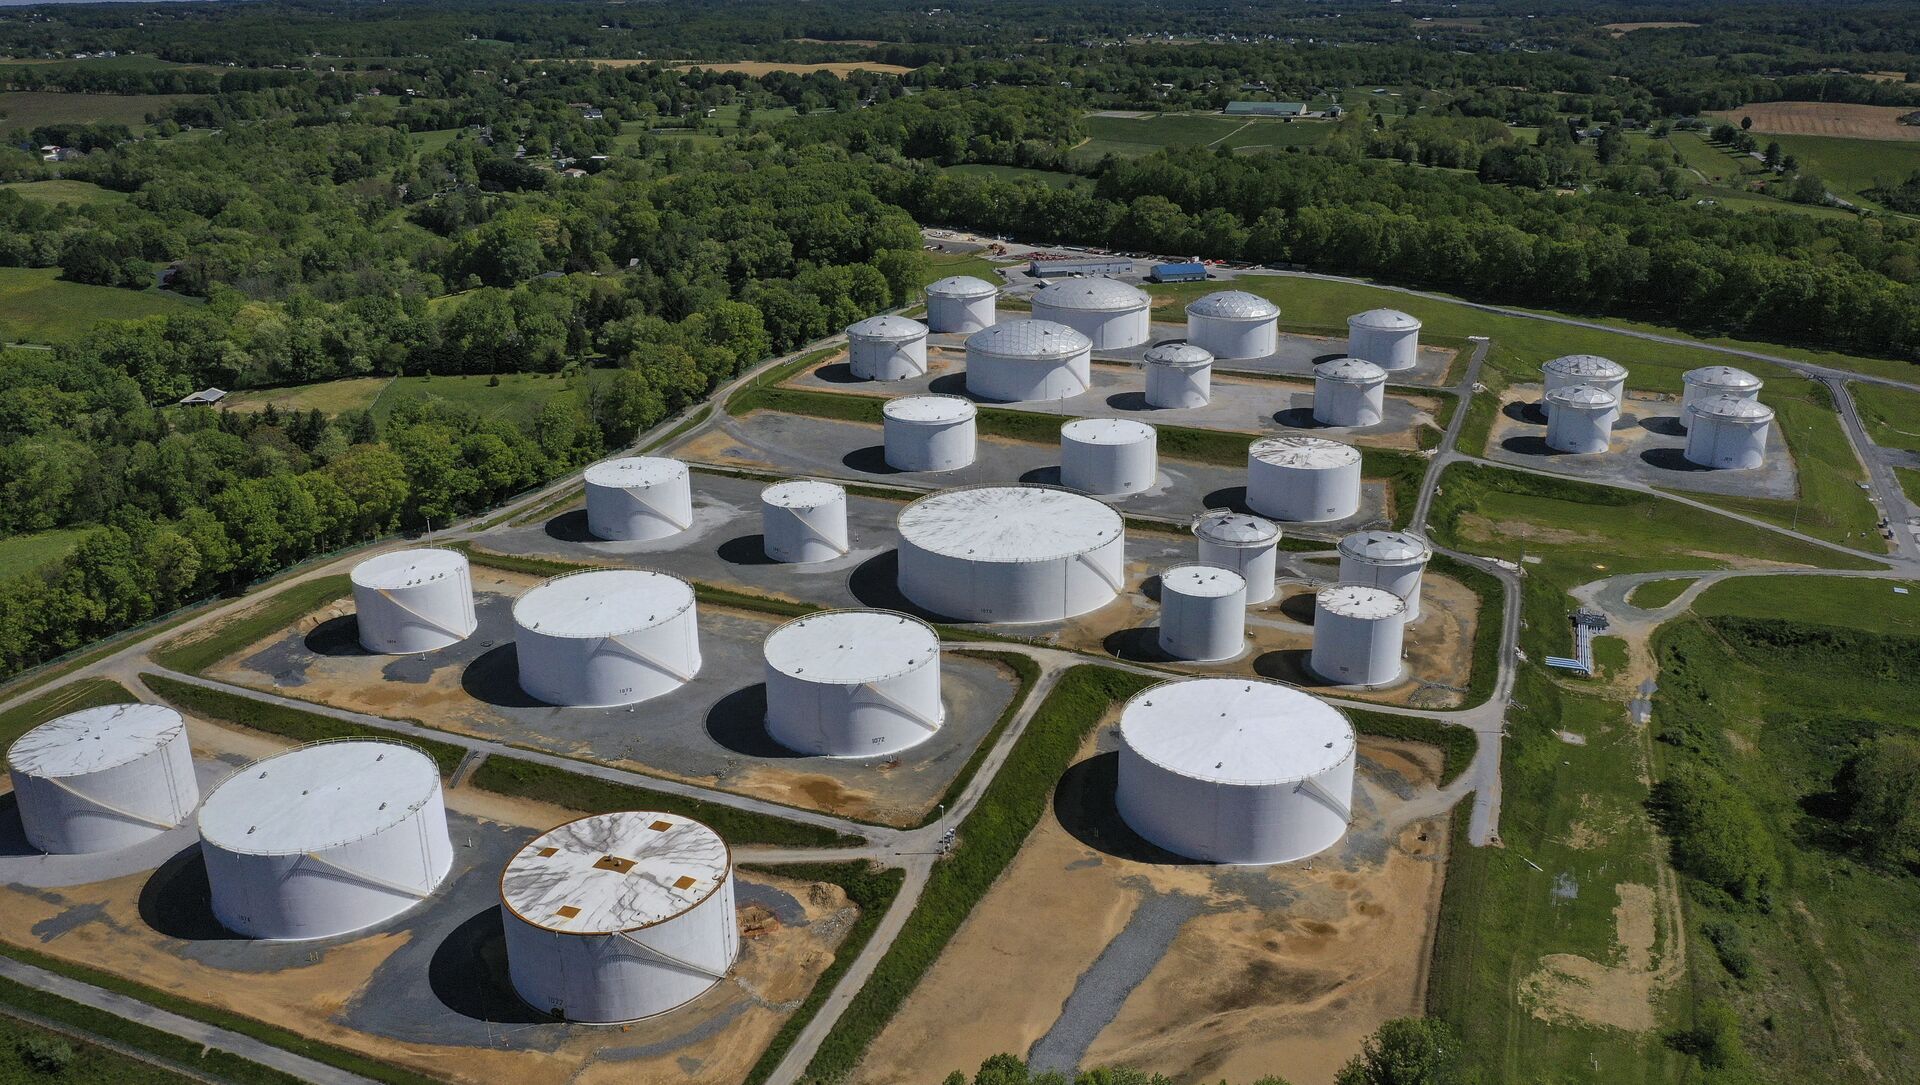 In an aerial view, fuel holding tanks are seen at Colonial Pipeline's Dorsey Junction Station on May 13, 2021 in Washington, DC. The Colonial Pipeline has returned to operations following a cyberattack that disrupted gas supply for the eastern U.S. for days.  - Sputnik International, 1920, 13.05.2021